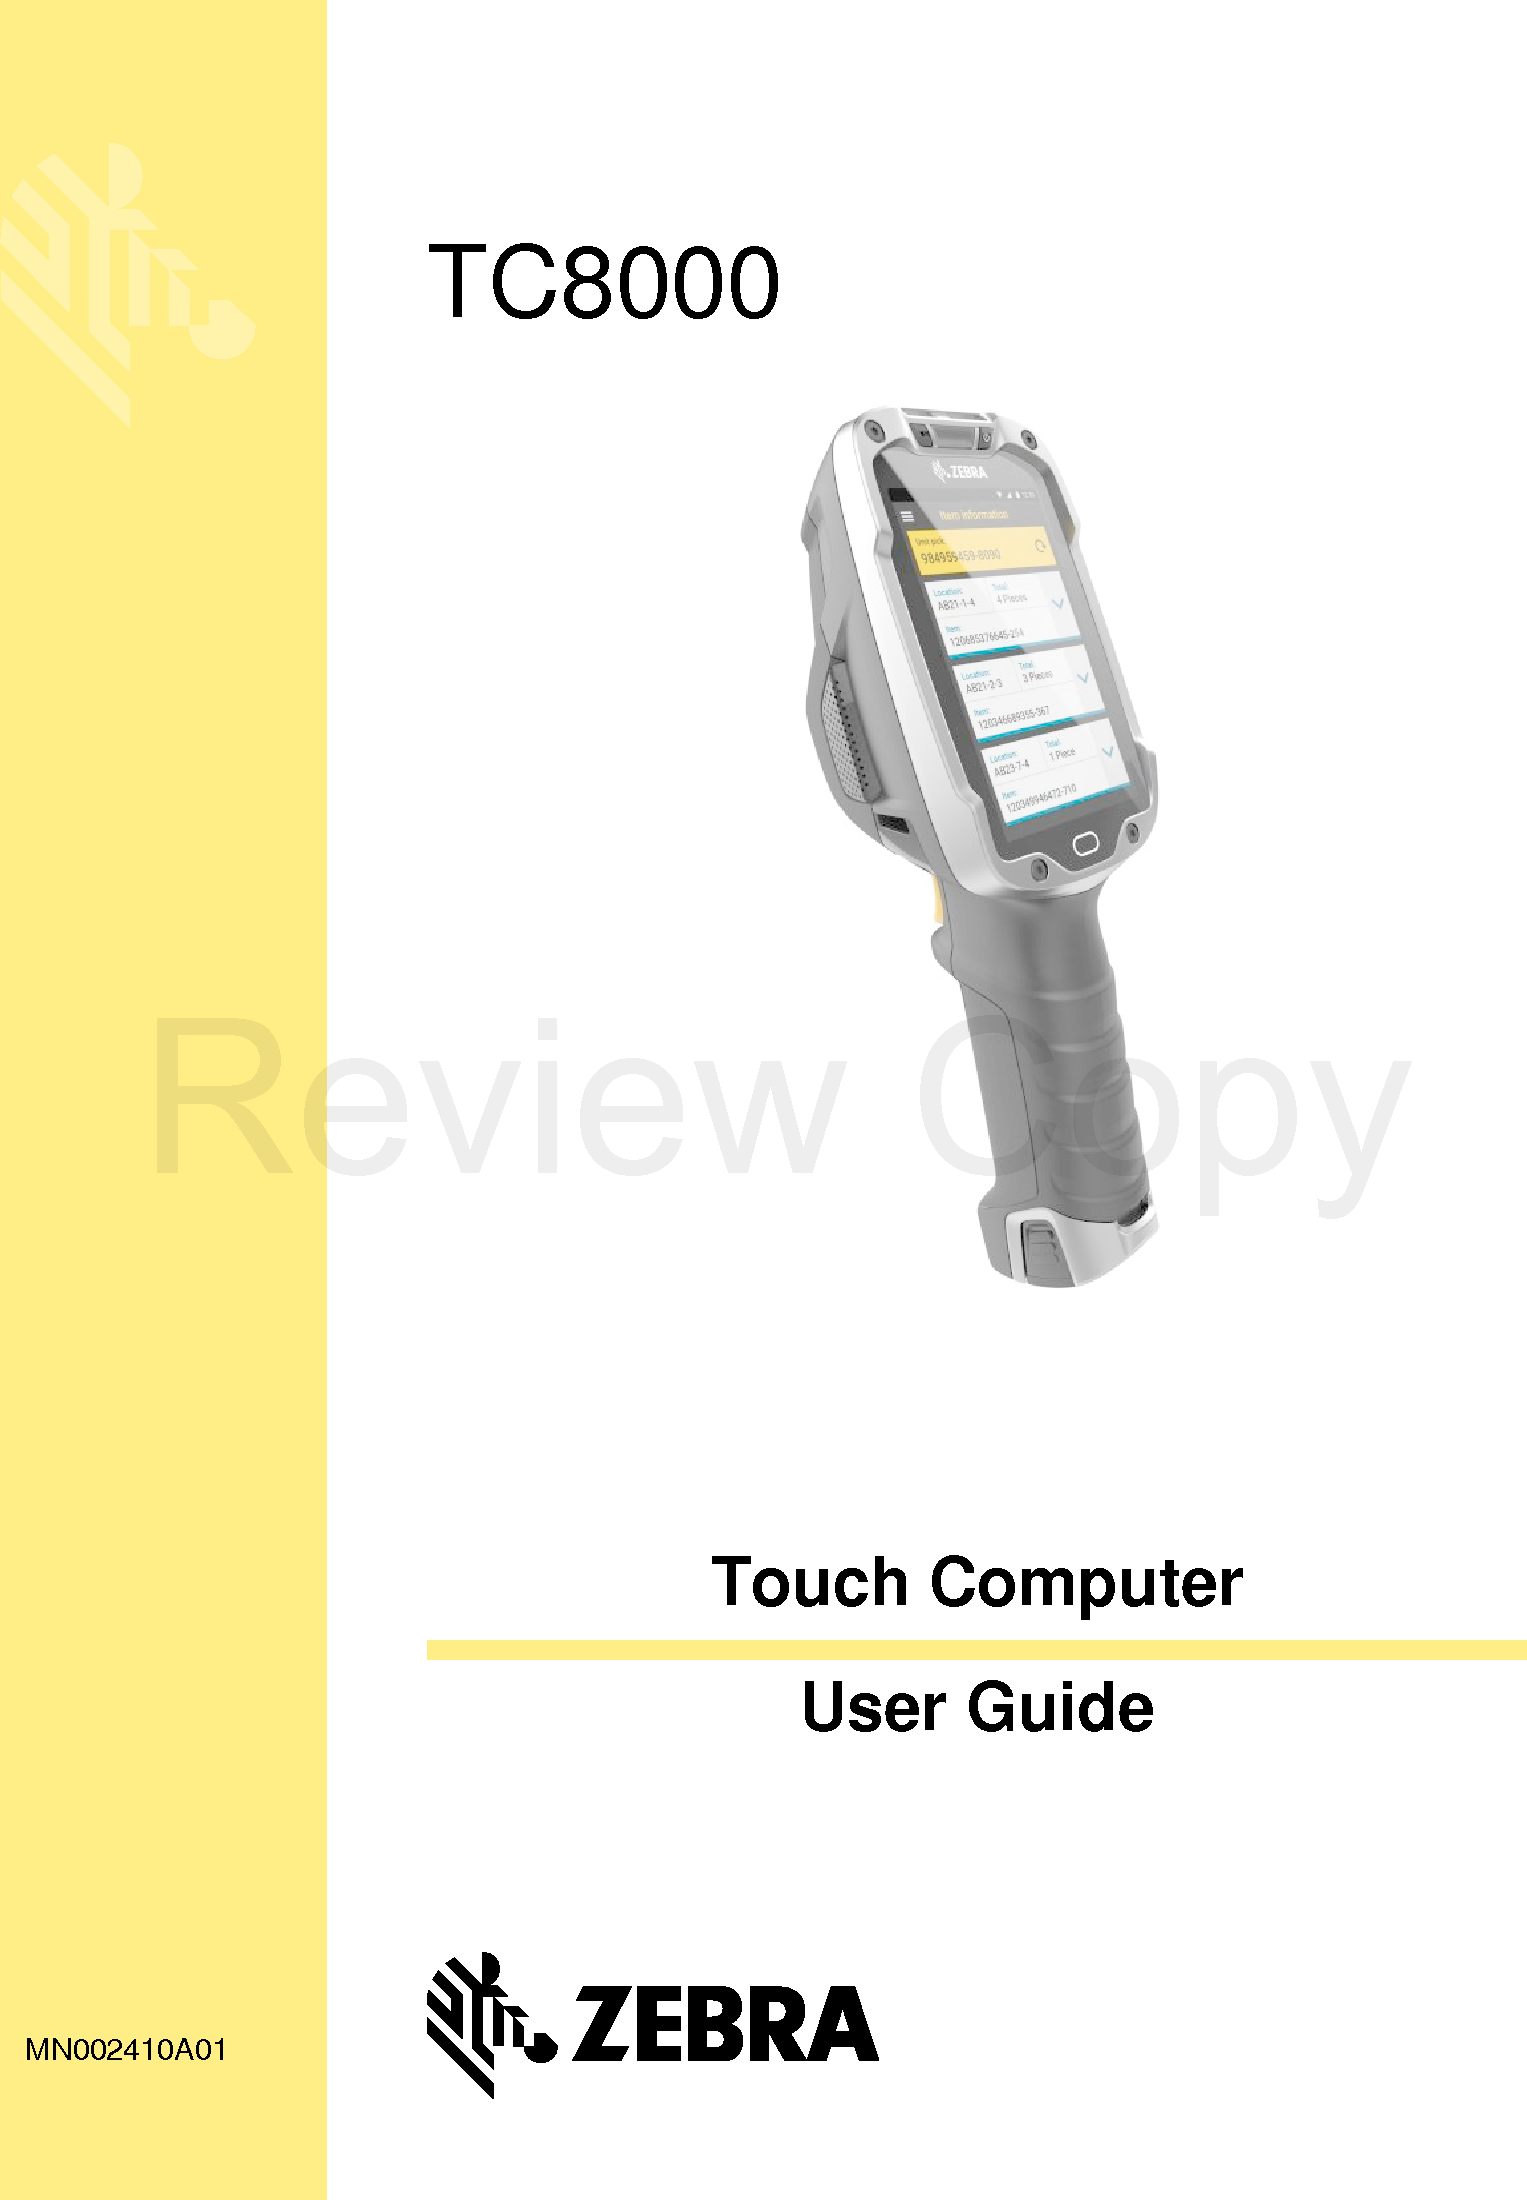 Touch ComputerUser GuideTC8000MN002410A01Review Copy